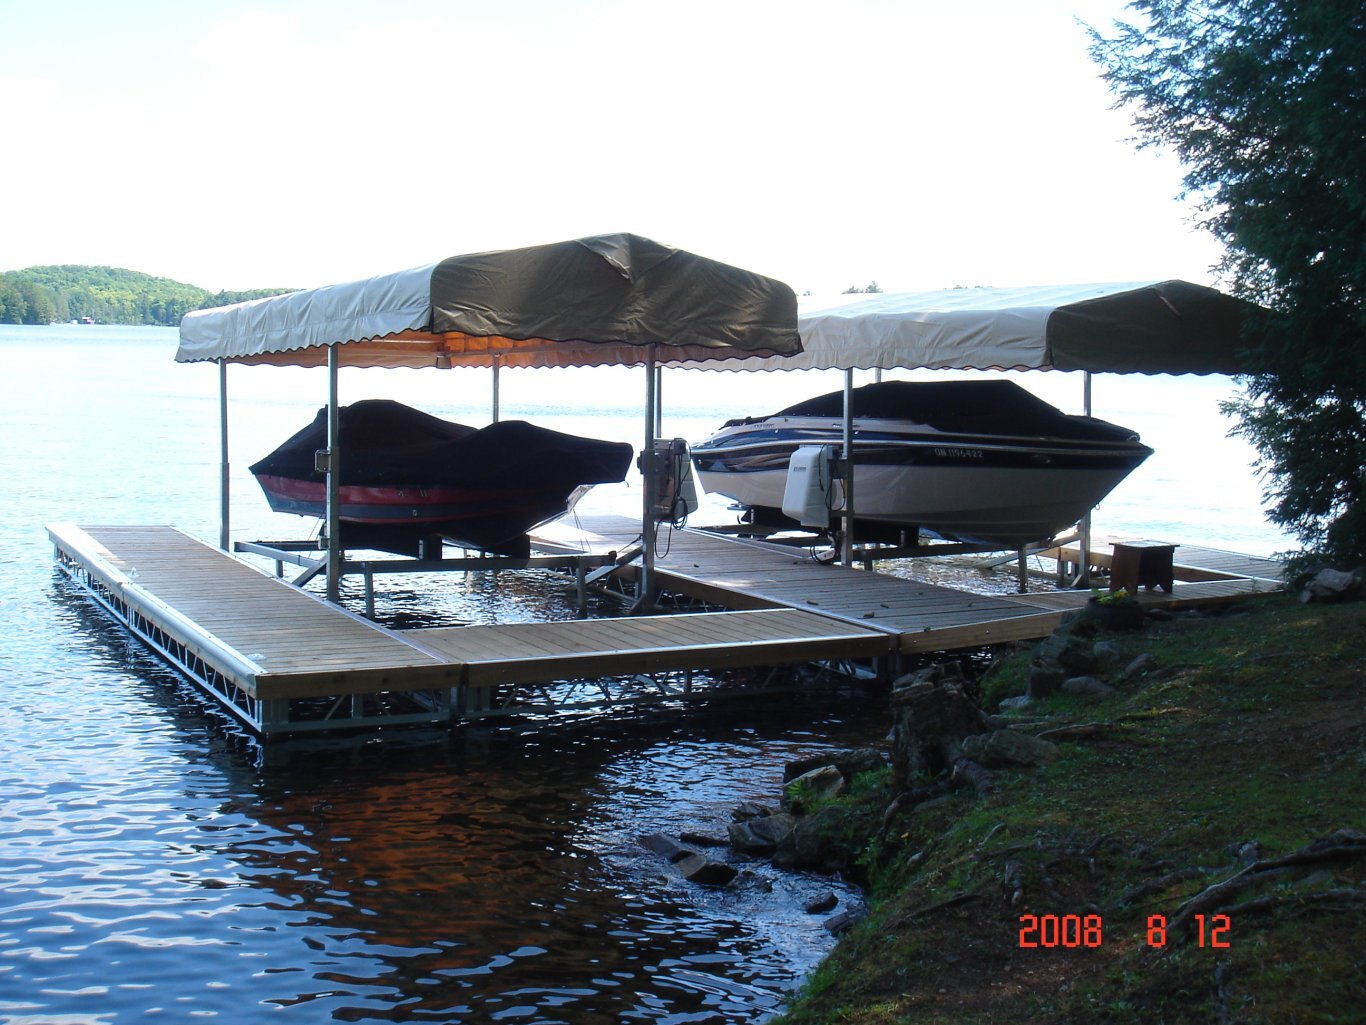 R & J Machine Cantilever Boat Lifts